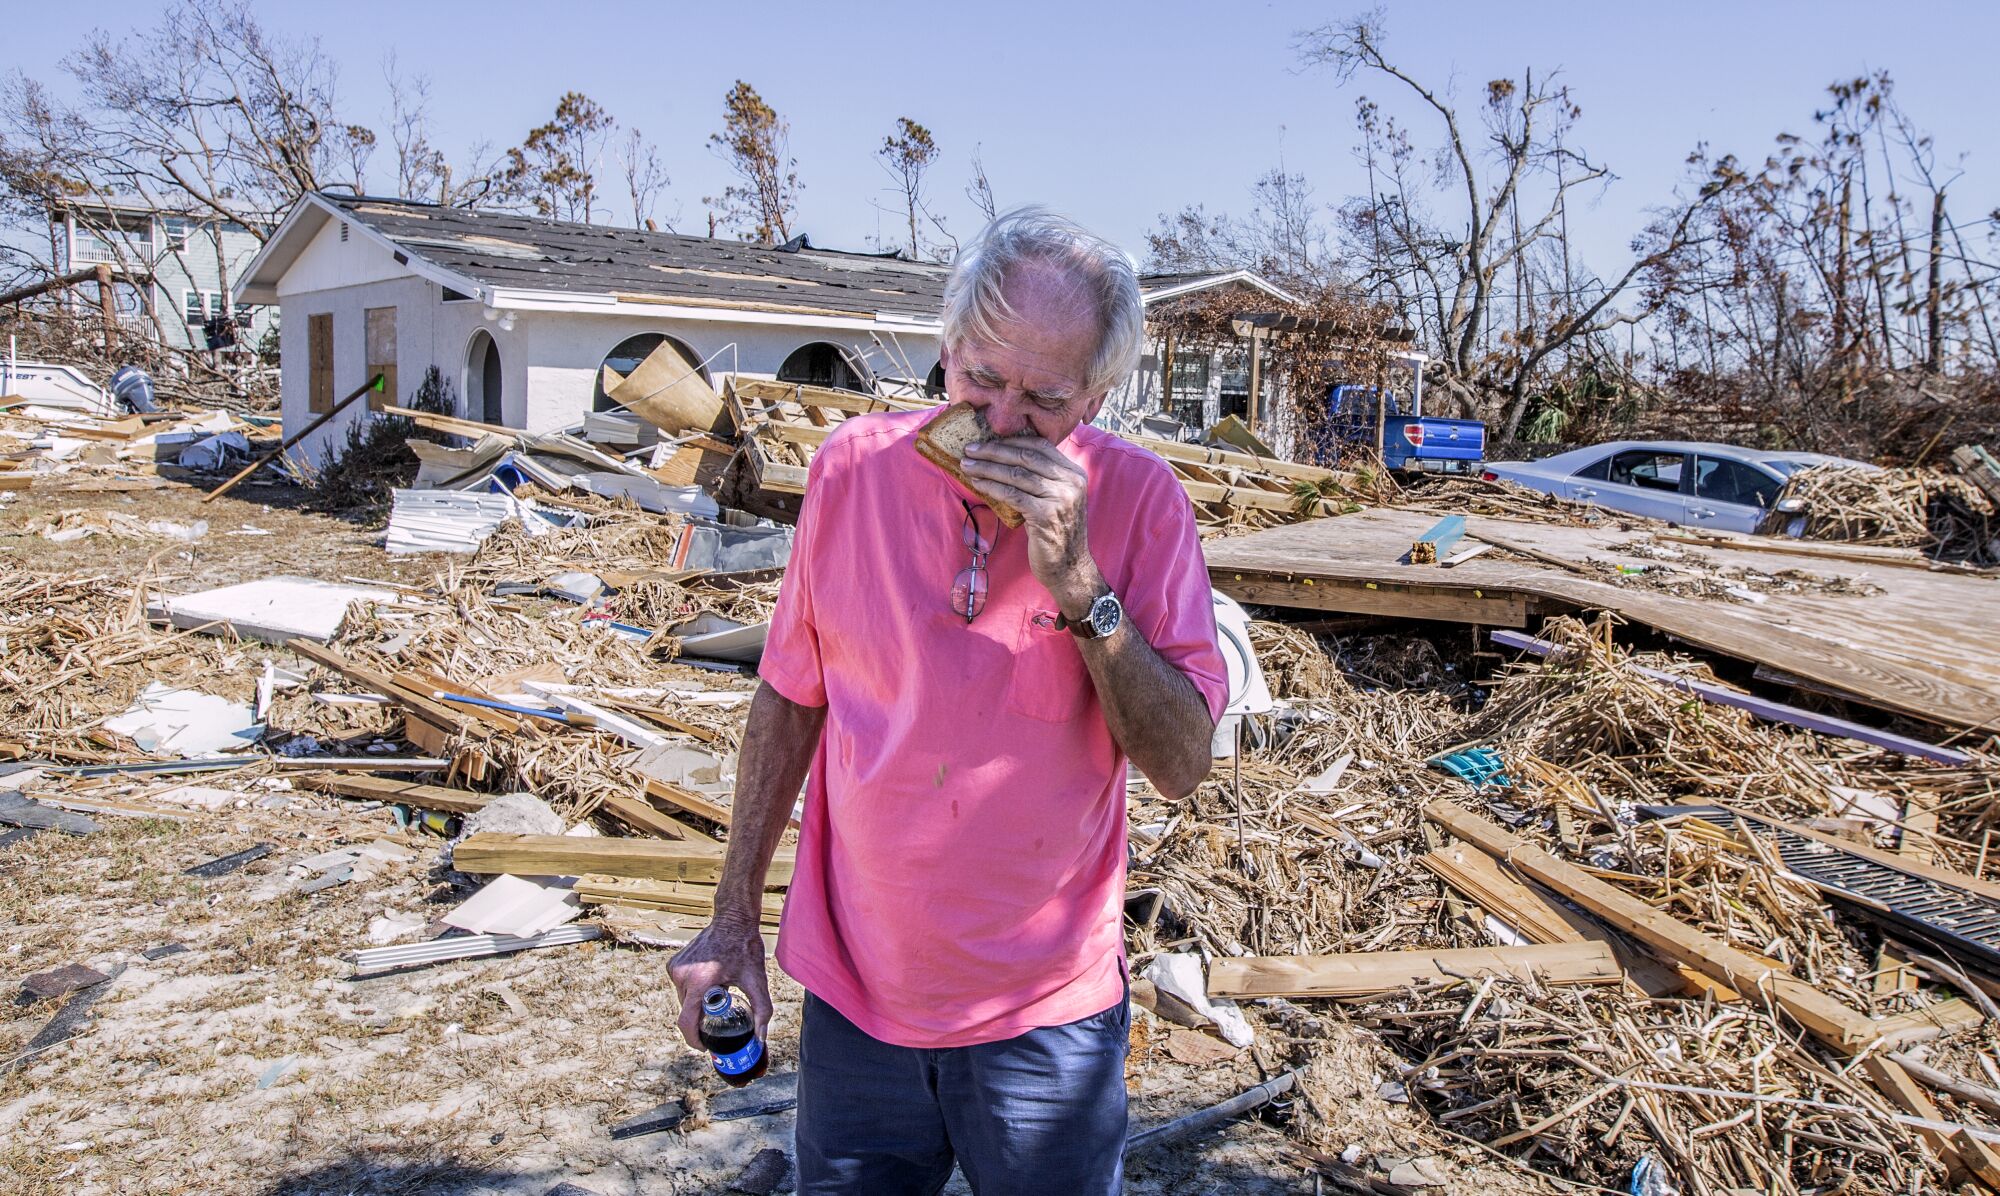 Mike Danner grabs a quick lunch eating a sandwich in front of his damaged home.